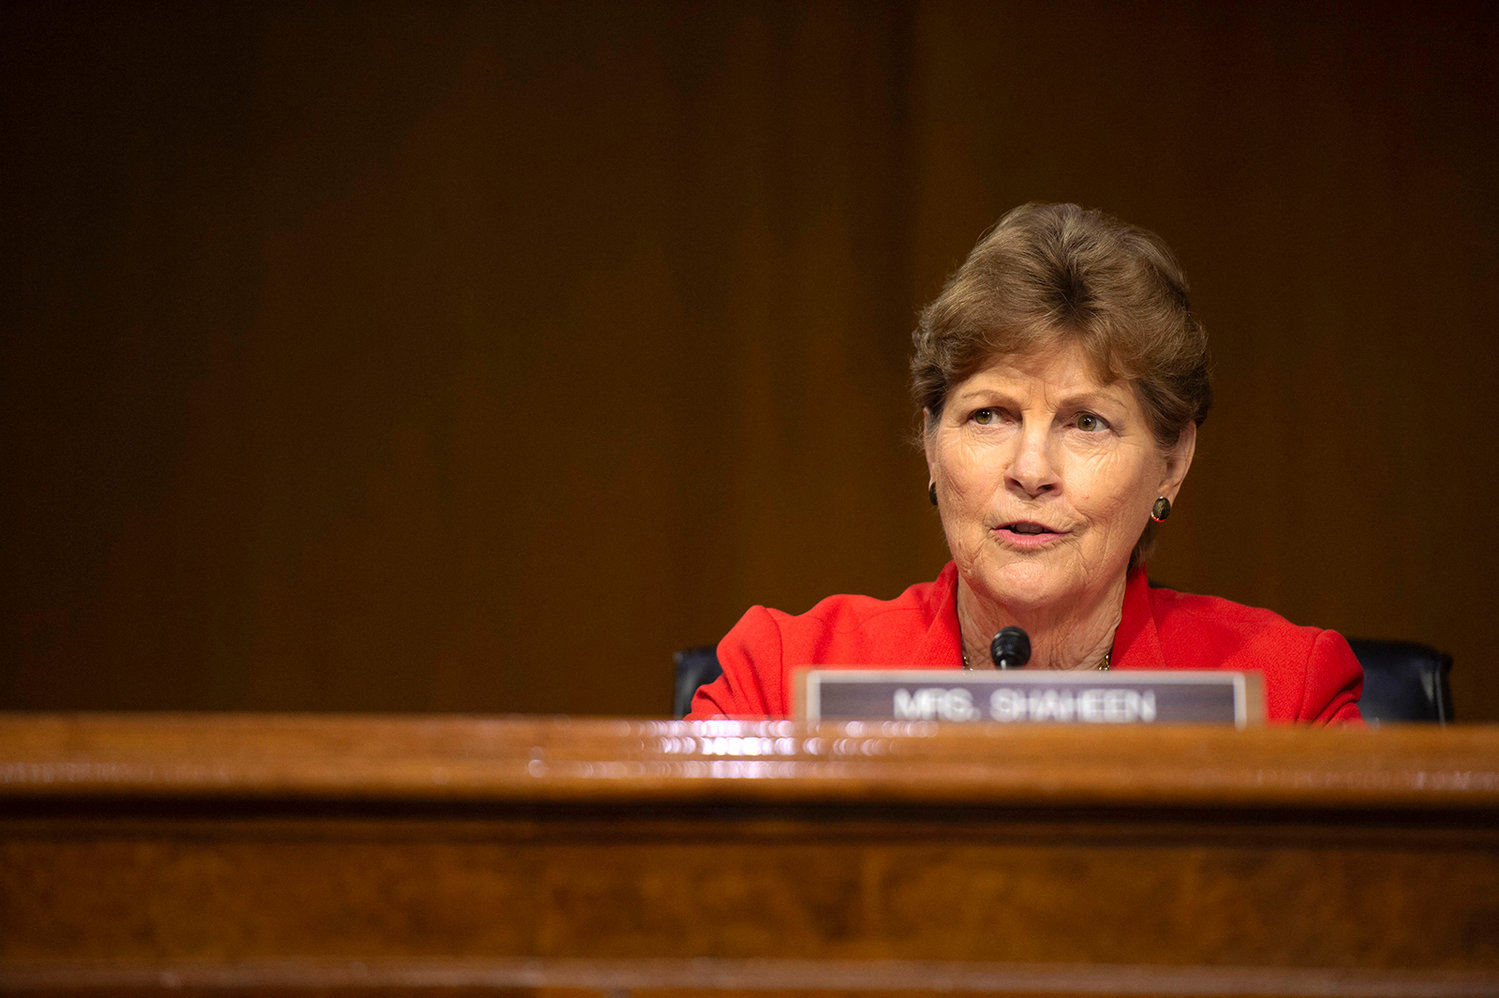 Senator Jeanne Shaheen, D-NH, speaks during a Senate Foreign Relations Committee hearing on "Review of the FY2023 State Department Budget Request," in Washington, DC, on April 26, 2022. (Bonnie Cash/Pool/AFP via Getty Images/TNS)